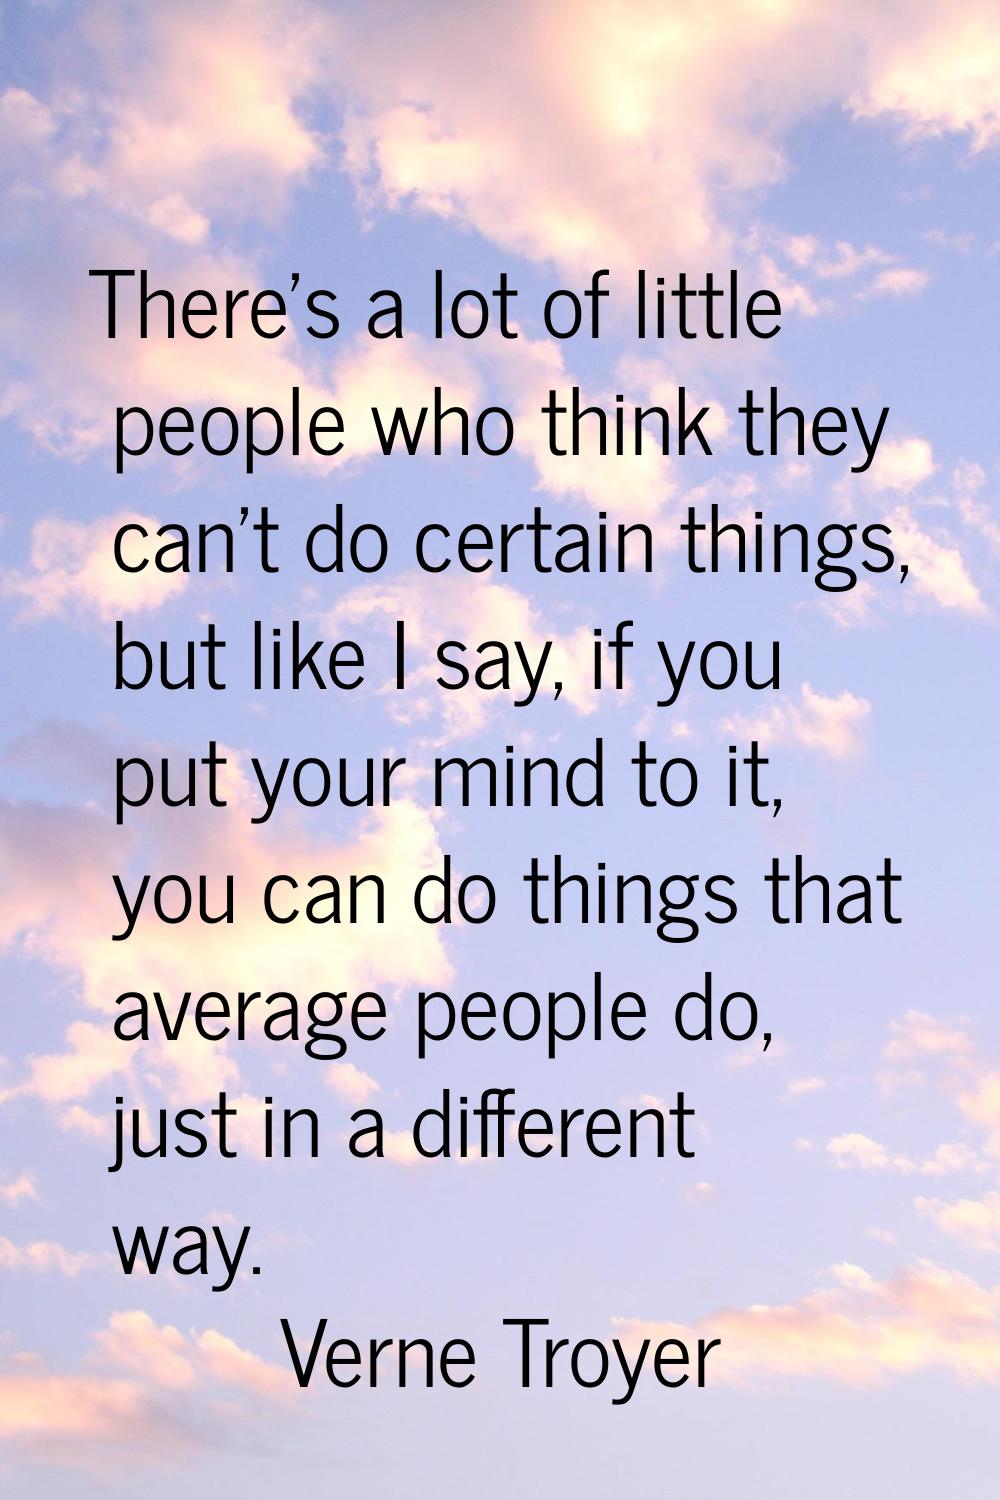 There's a lot of little people who think they can't do certain things, but like I say, if you put y